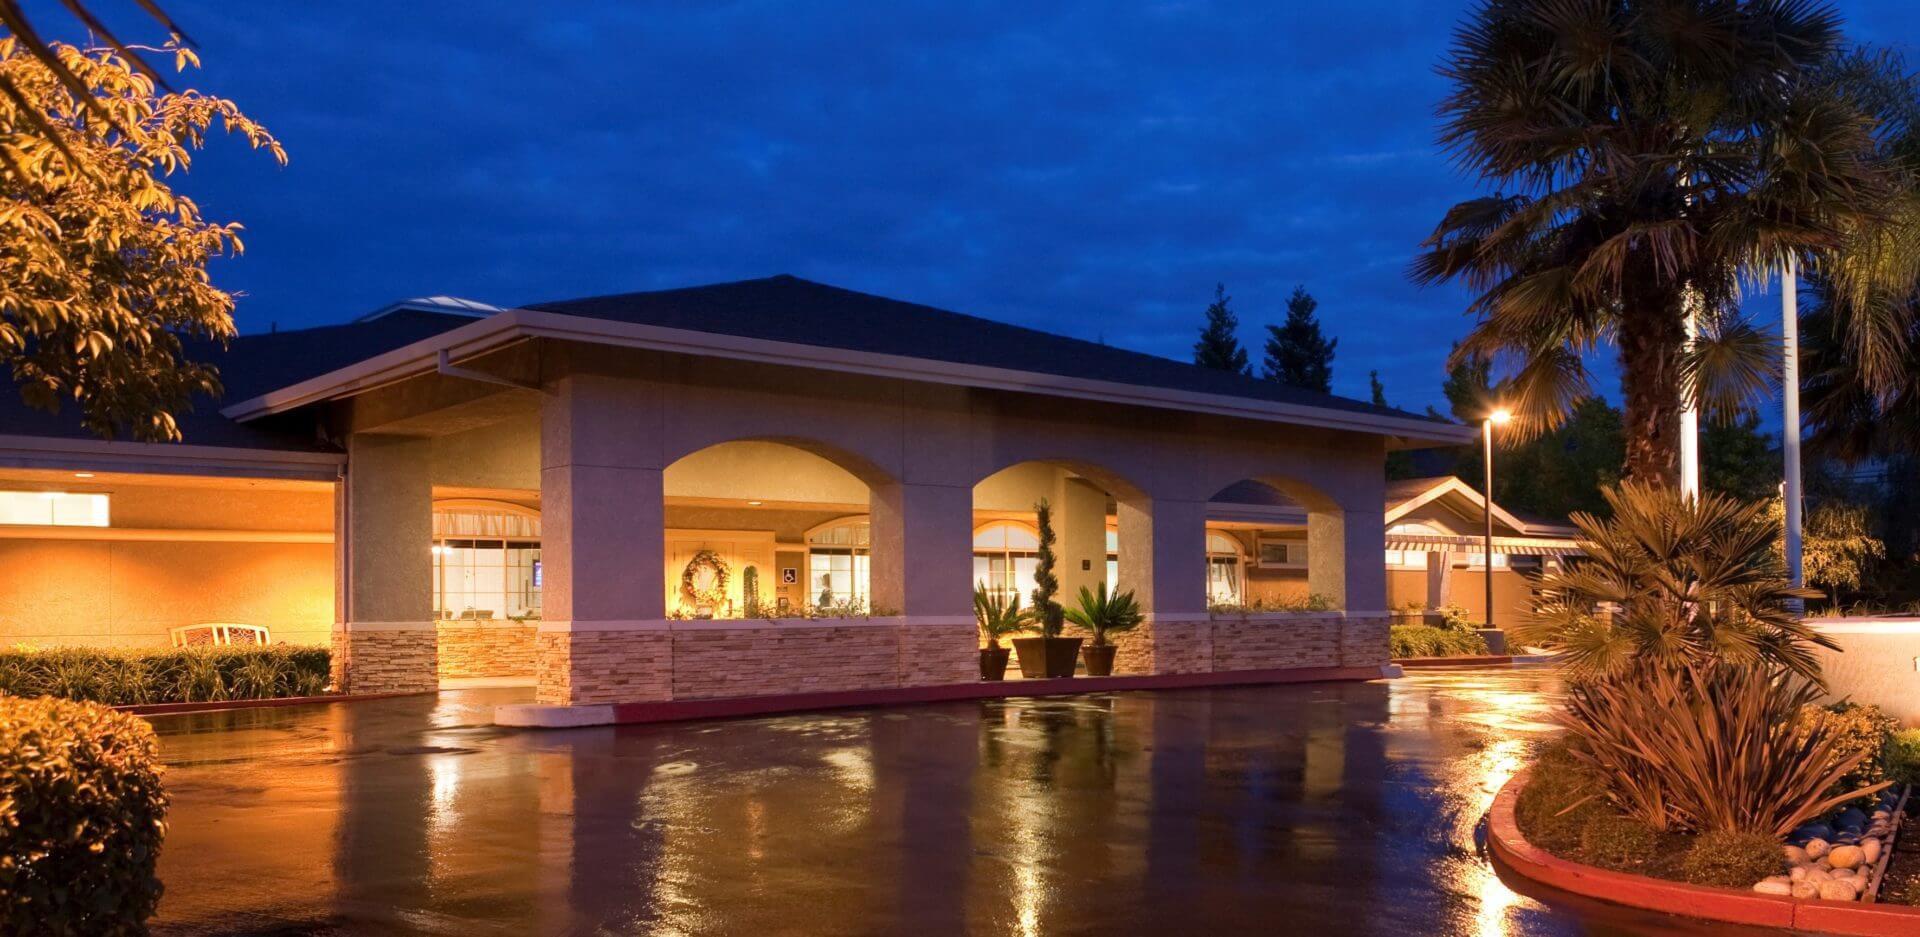 Carlton Senior Living Downtown Pleasant Hill offers Independent Living, Assisted and Memory Care